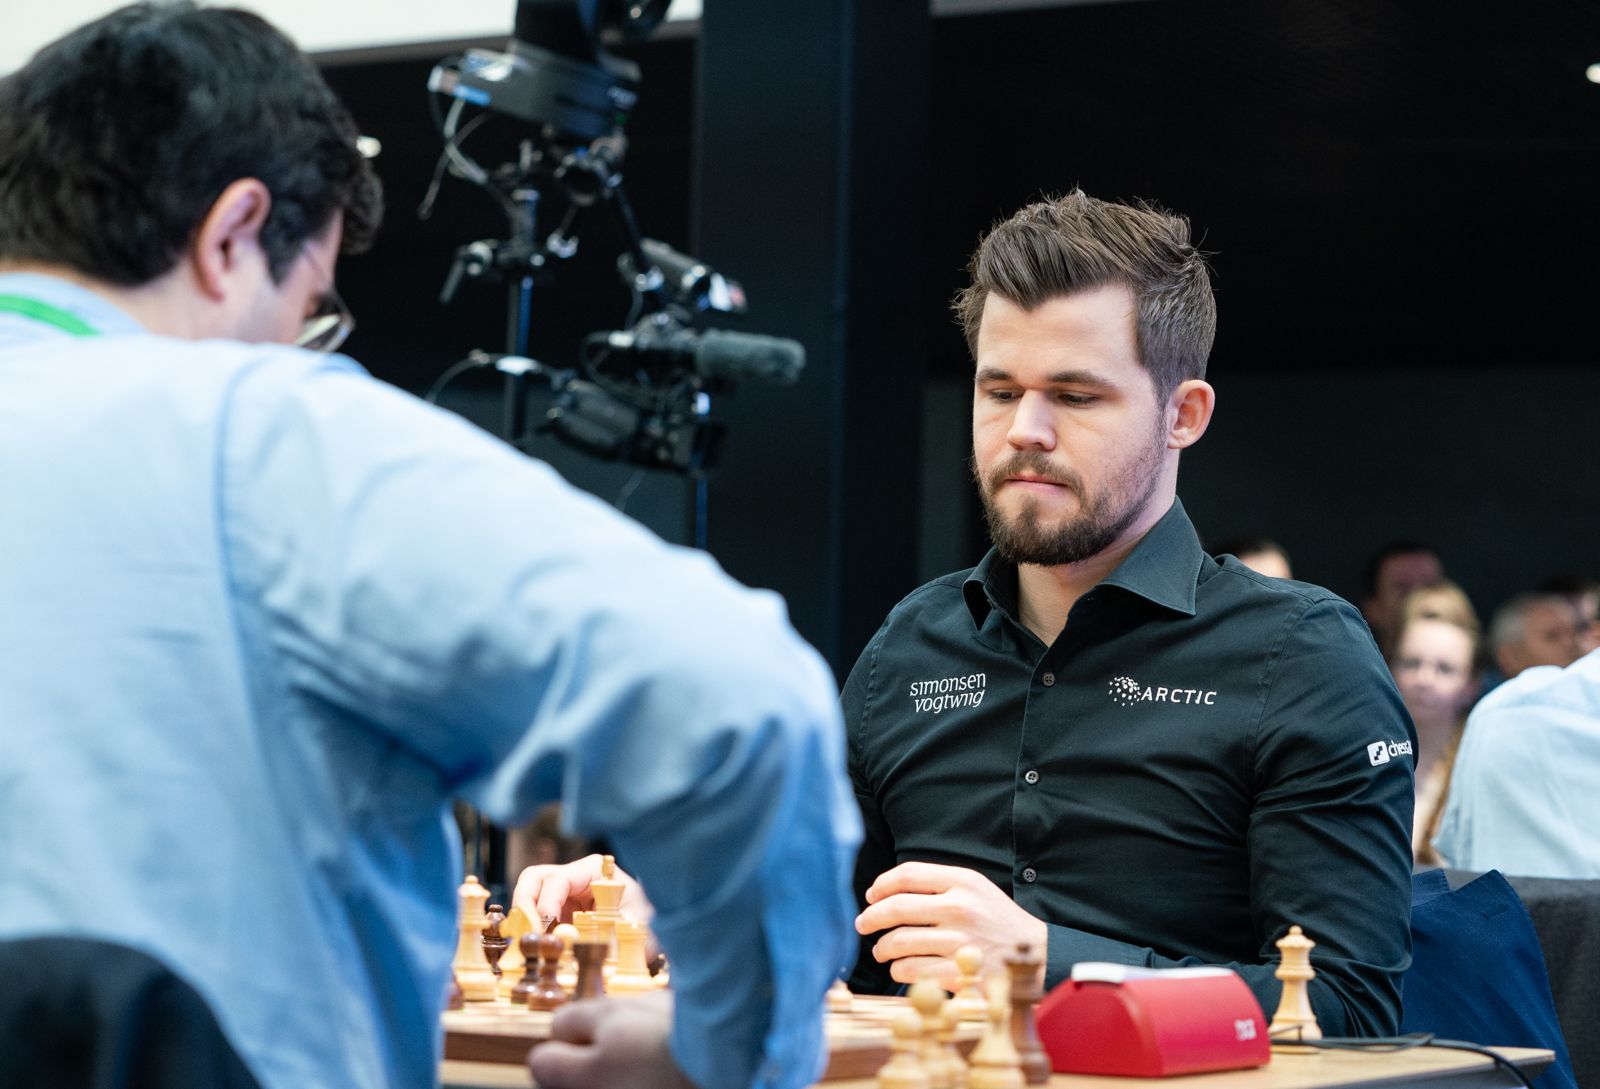 Play Magnus - The World Rapid and Blitz Chess Championships 2015 start on  October 9th in Berlin. To celebrate, we're running a new competition where  2 WINNERS will win a signed #PlayMagnus